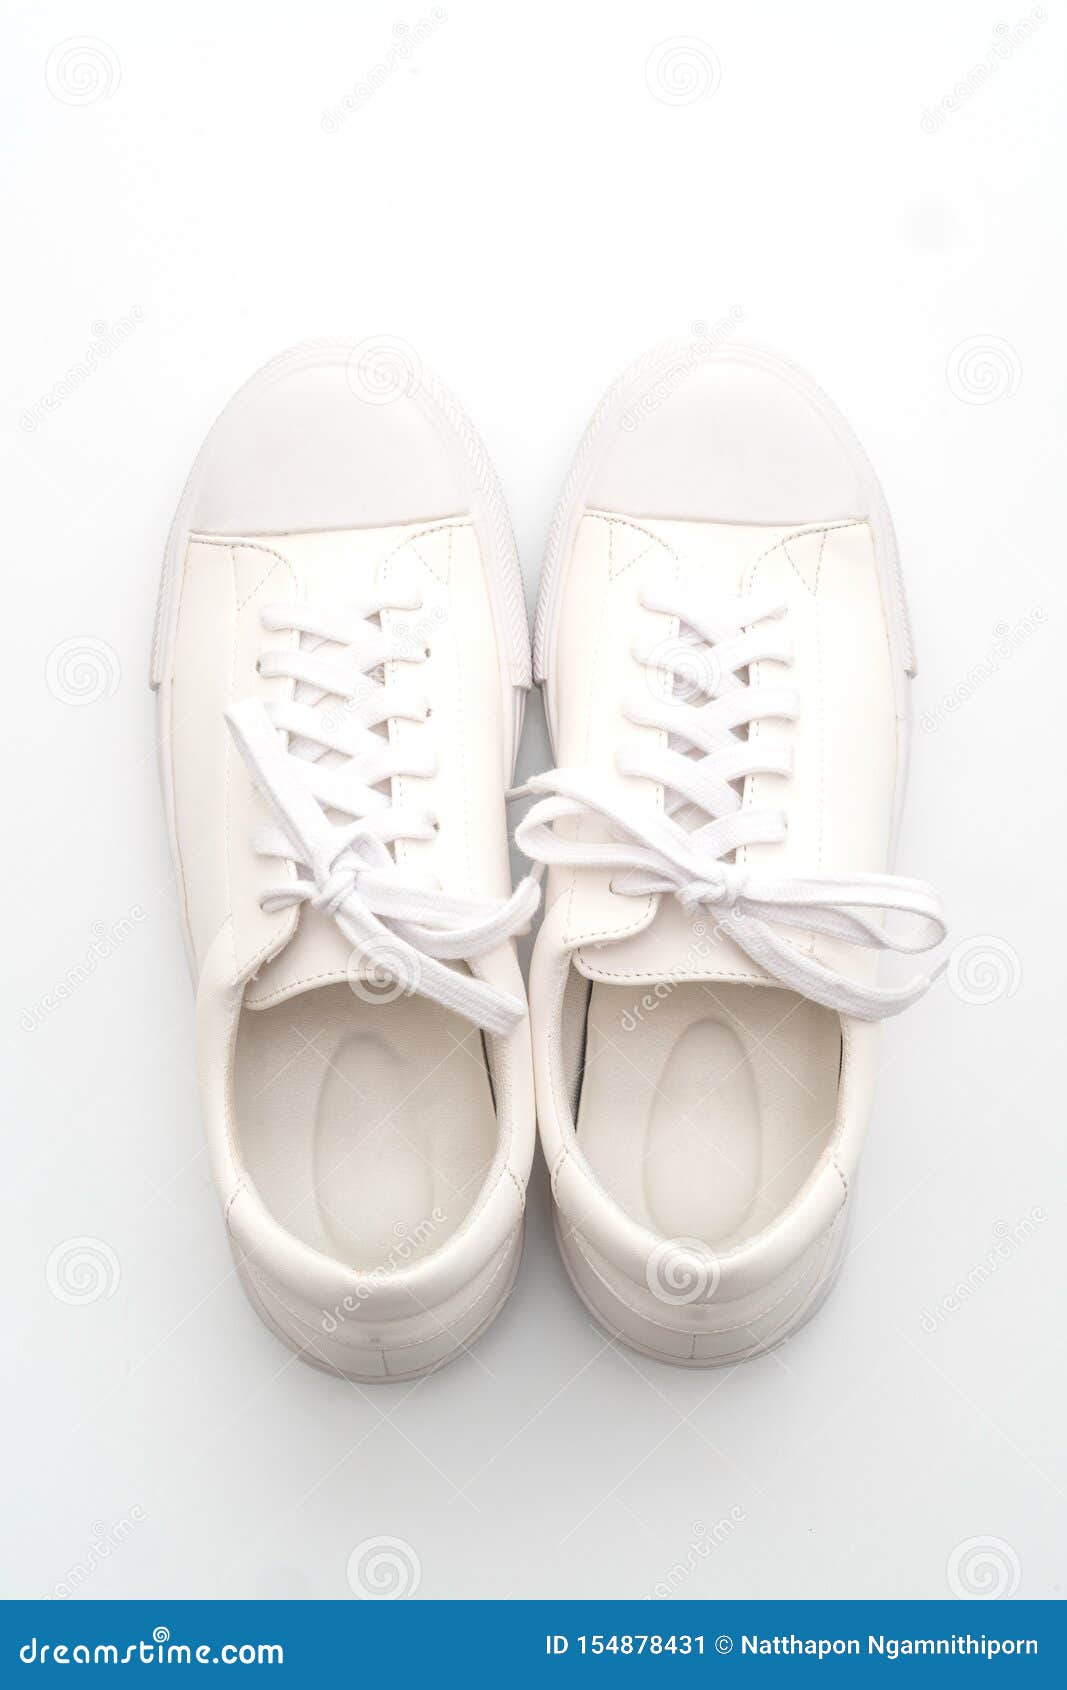 White Sneakers on White Background Stock Image - Image of background ...